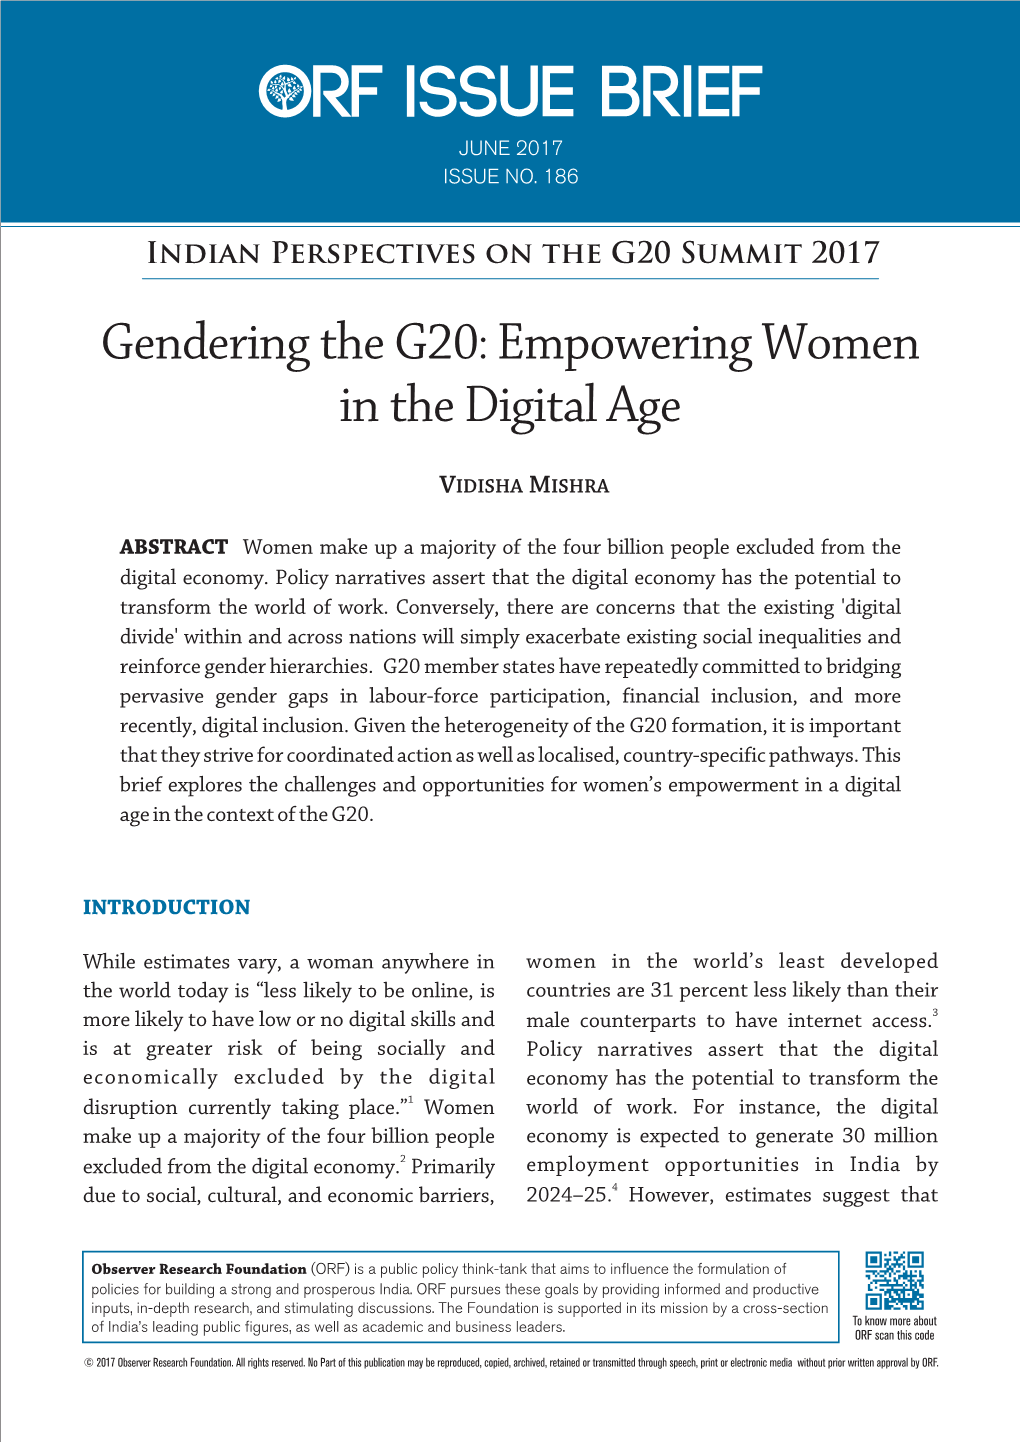 Gendering the G20: Empowering Women in the Digital Age